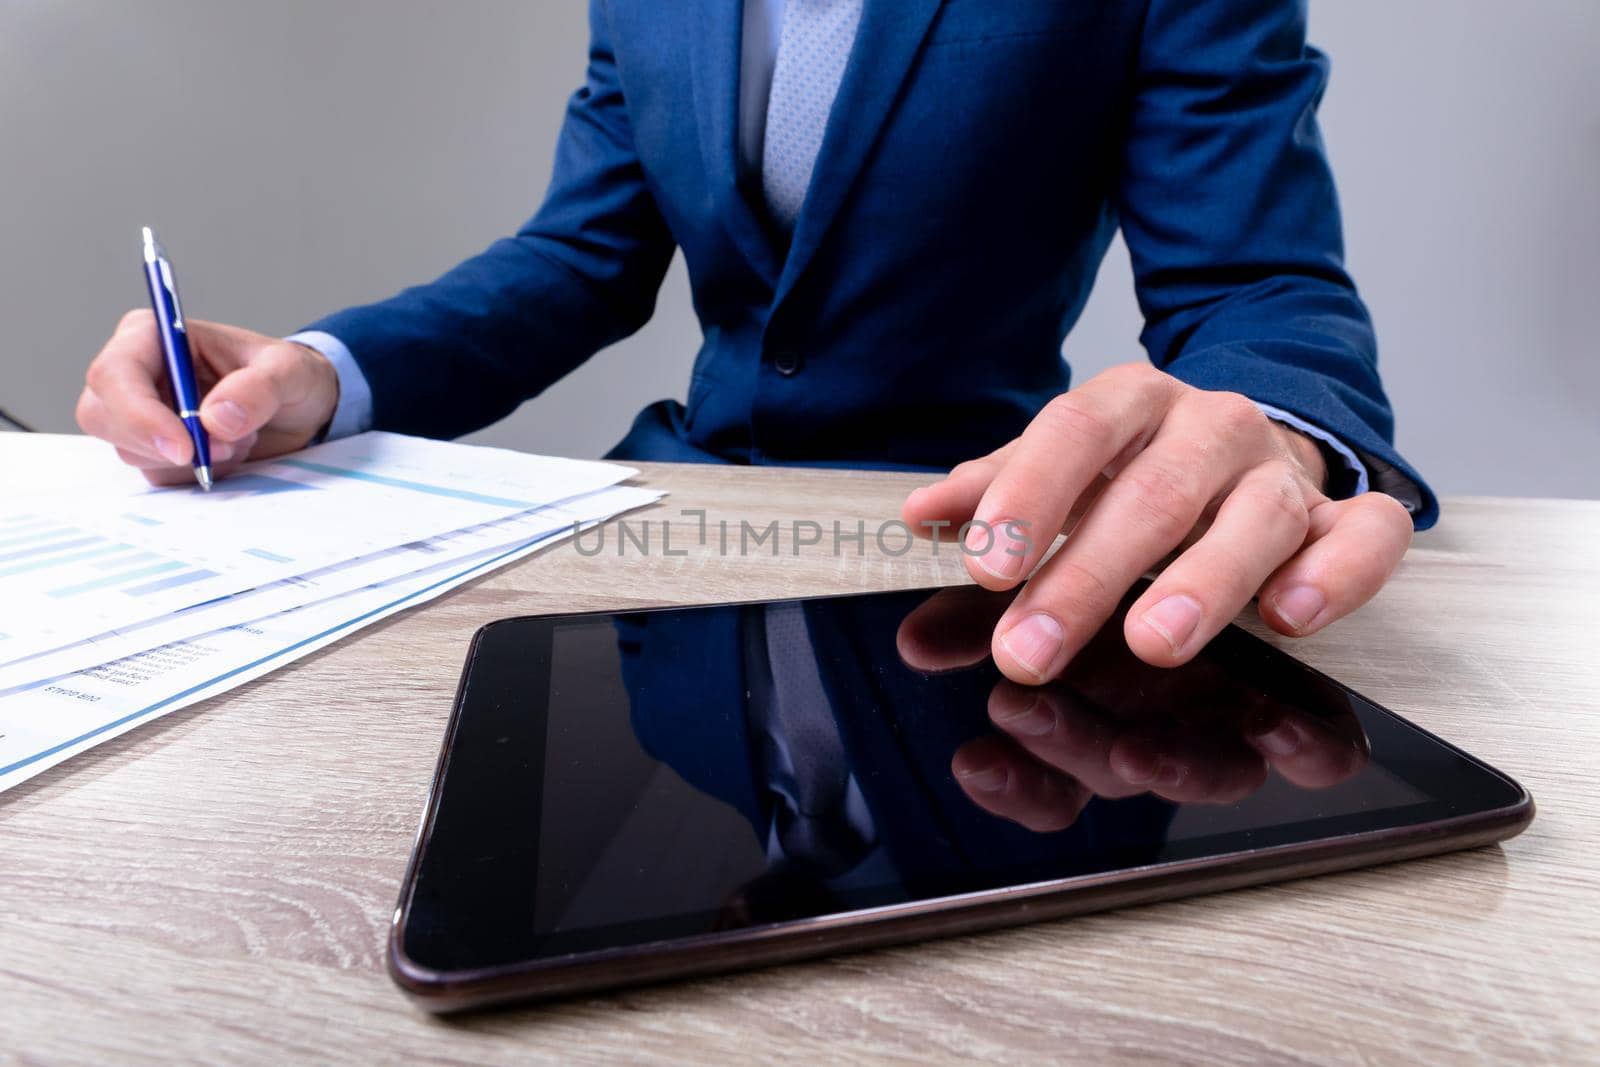 Midsection of caucasian businessman using tablet and taking notes, isolated on grey background by Wavebreakmedia